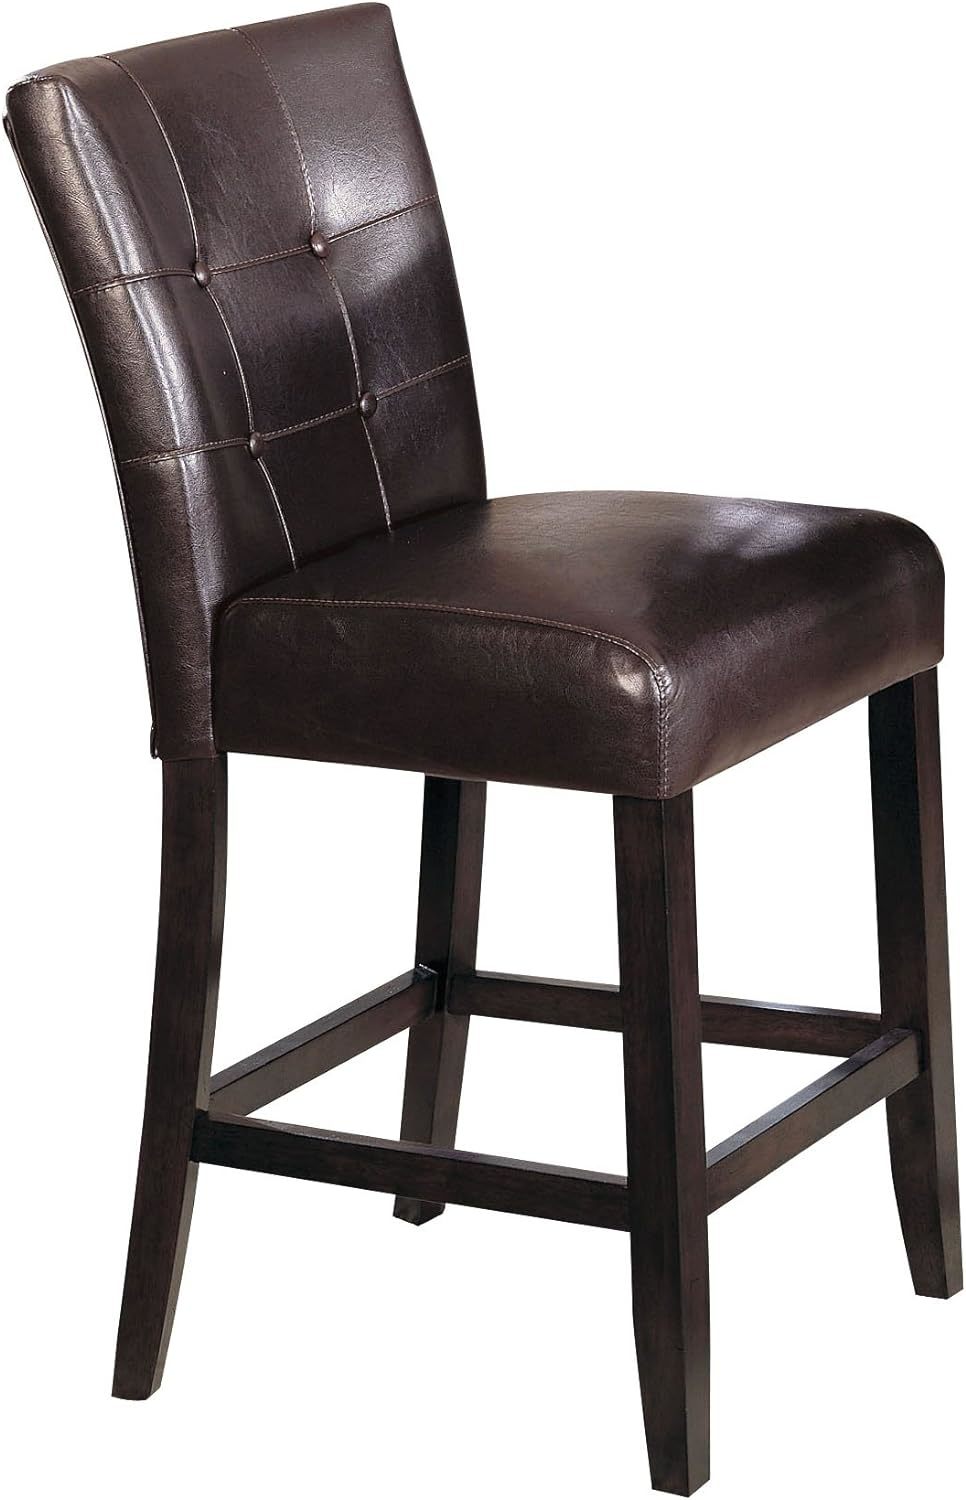 Brown, 24-Inch-High Counter Height Chairs In A Set Of Two From Acme 0. - $201.97